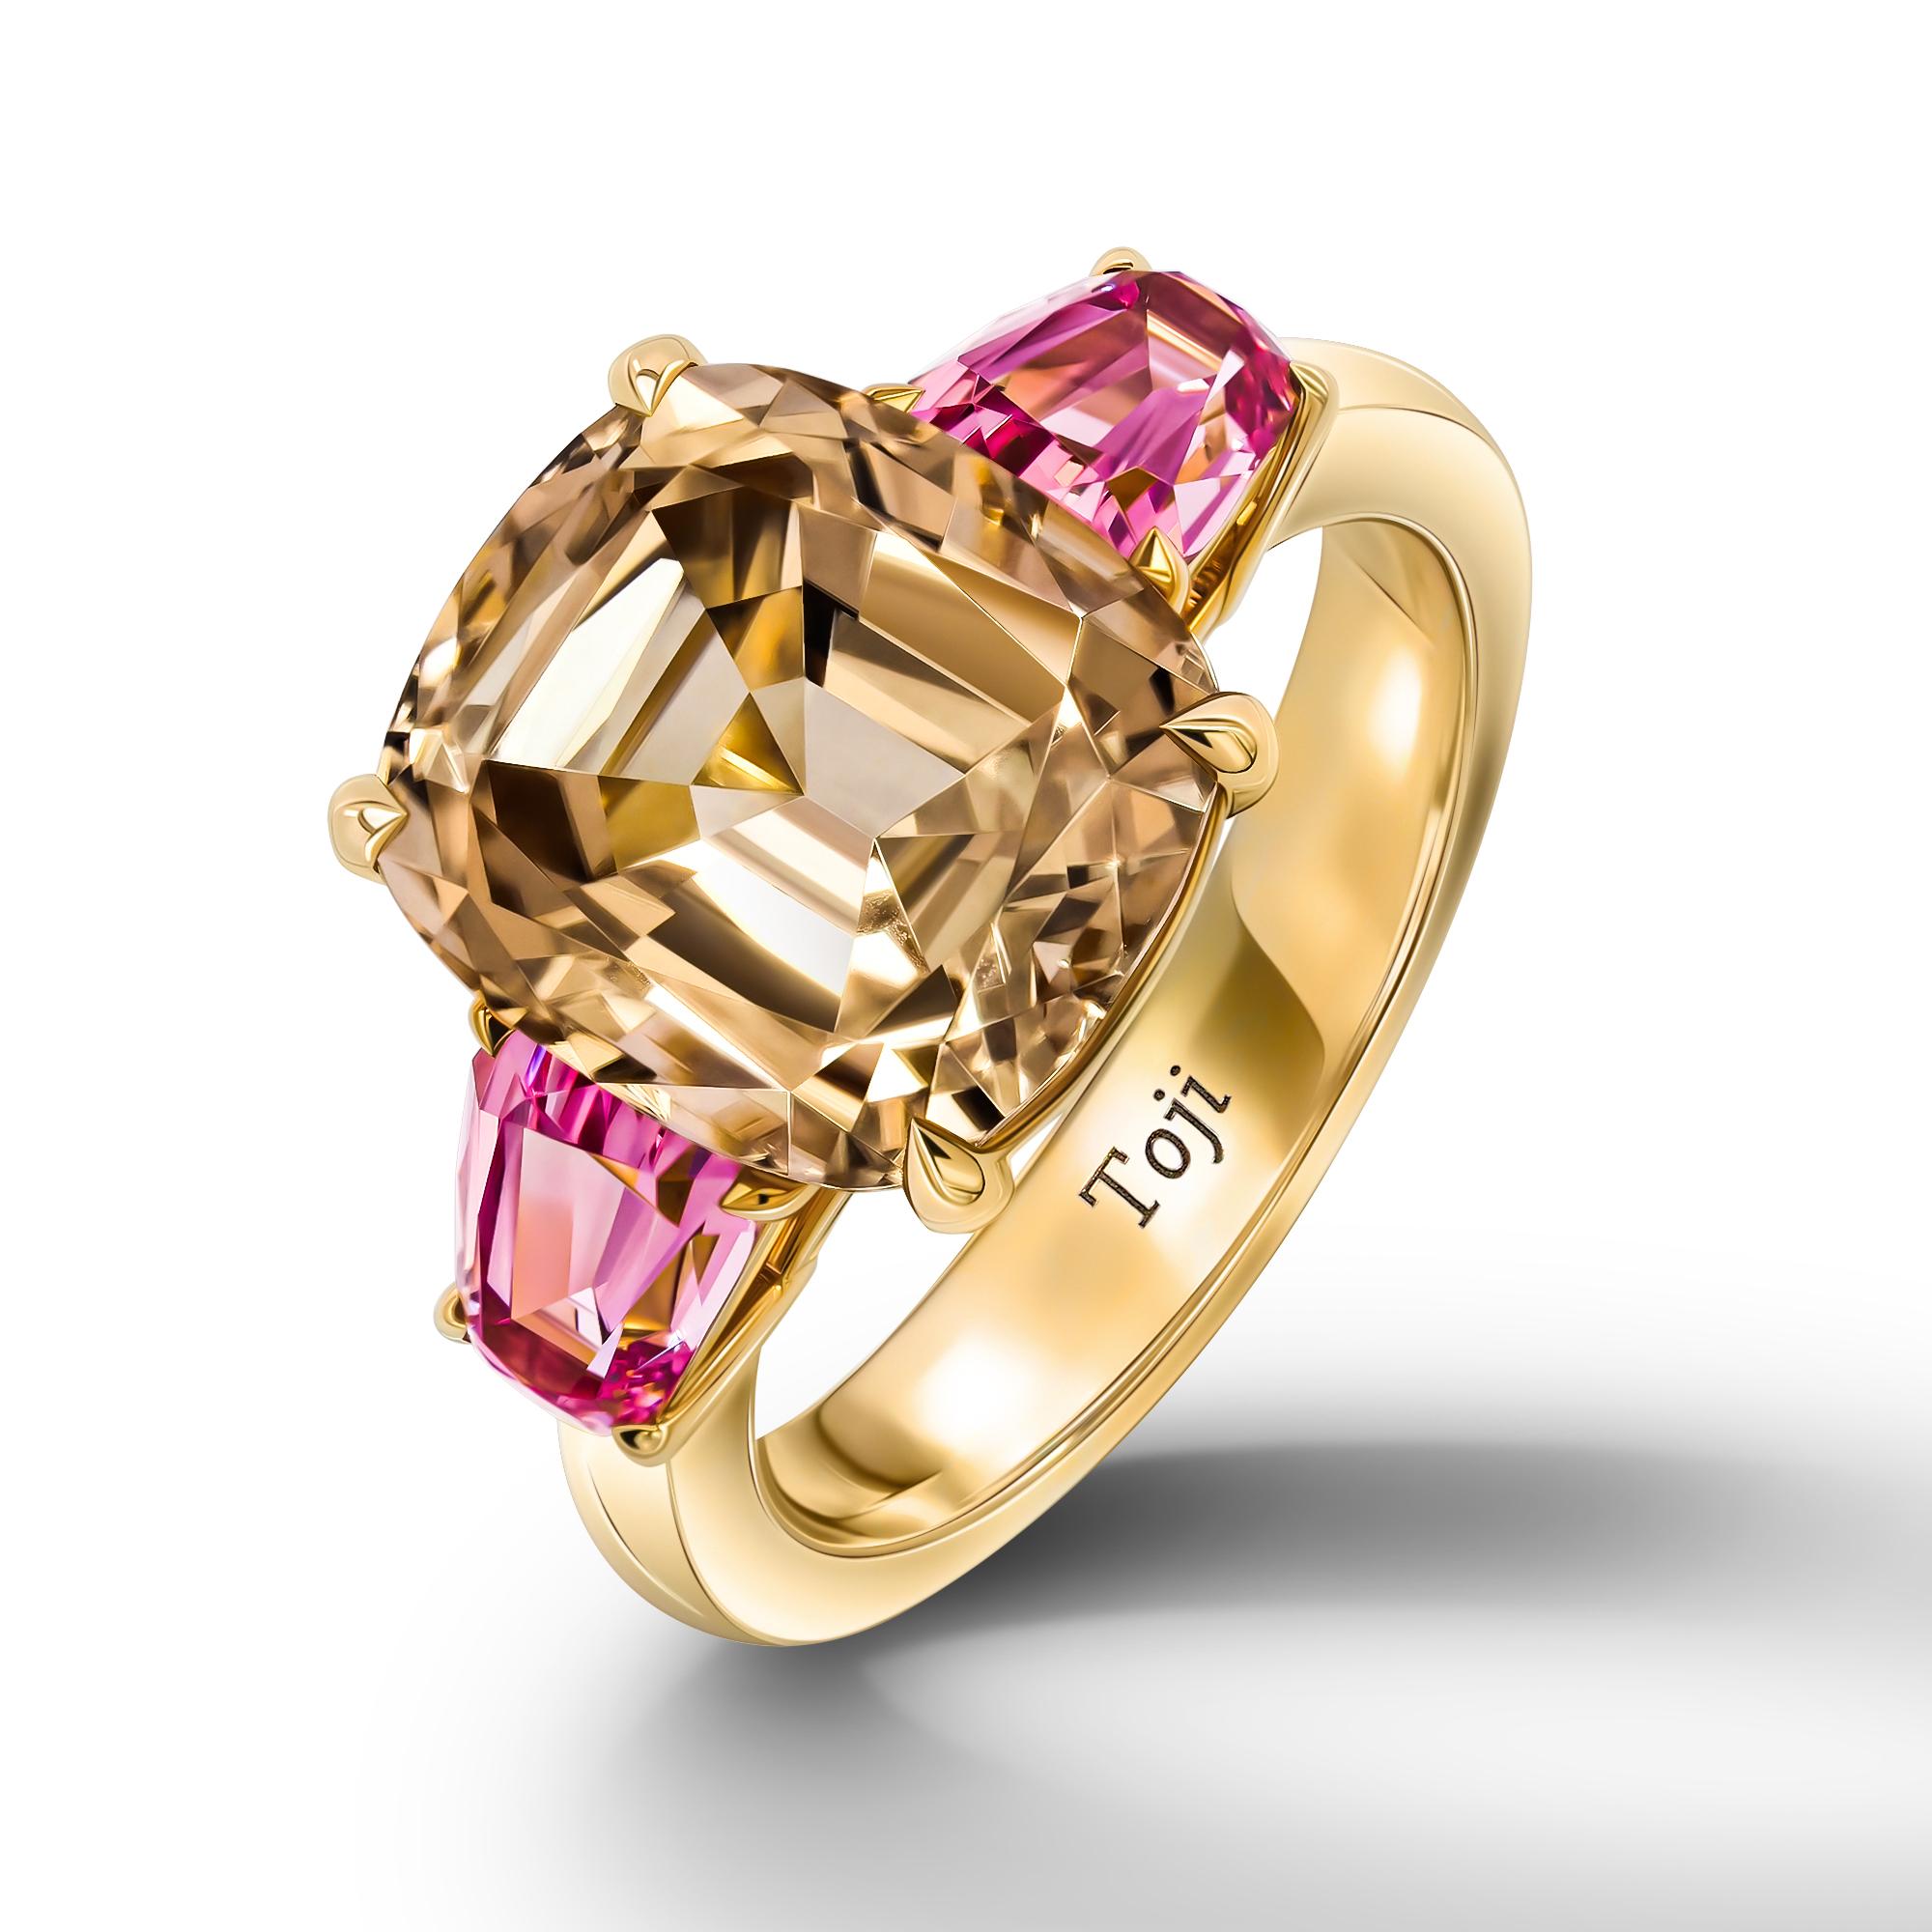 •	18k Yellow Gold
•	Gold color Tourmaline in cushion cut – total carat weight 5.47.
•	Pink Spinels in fantasy cut – 2 pc total carat weight 1.55.
•	Ring Size - 6